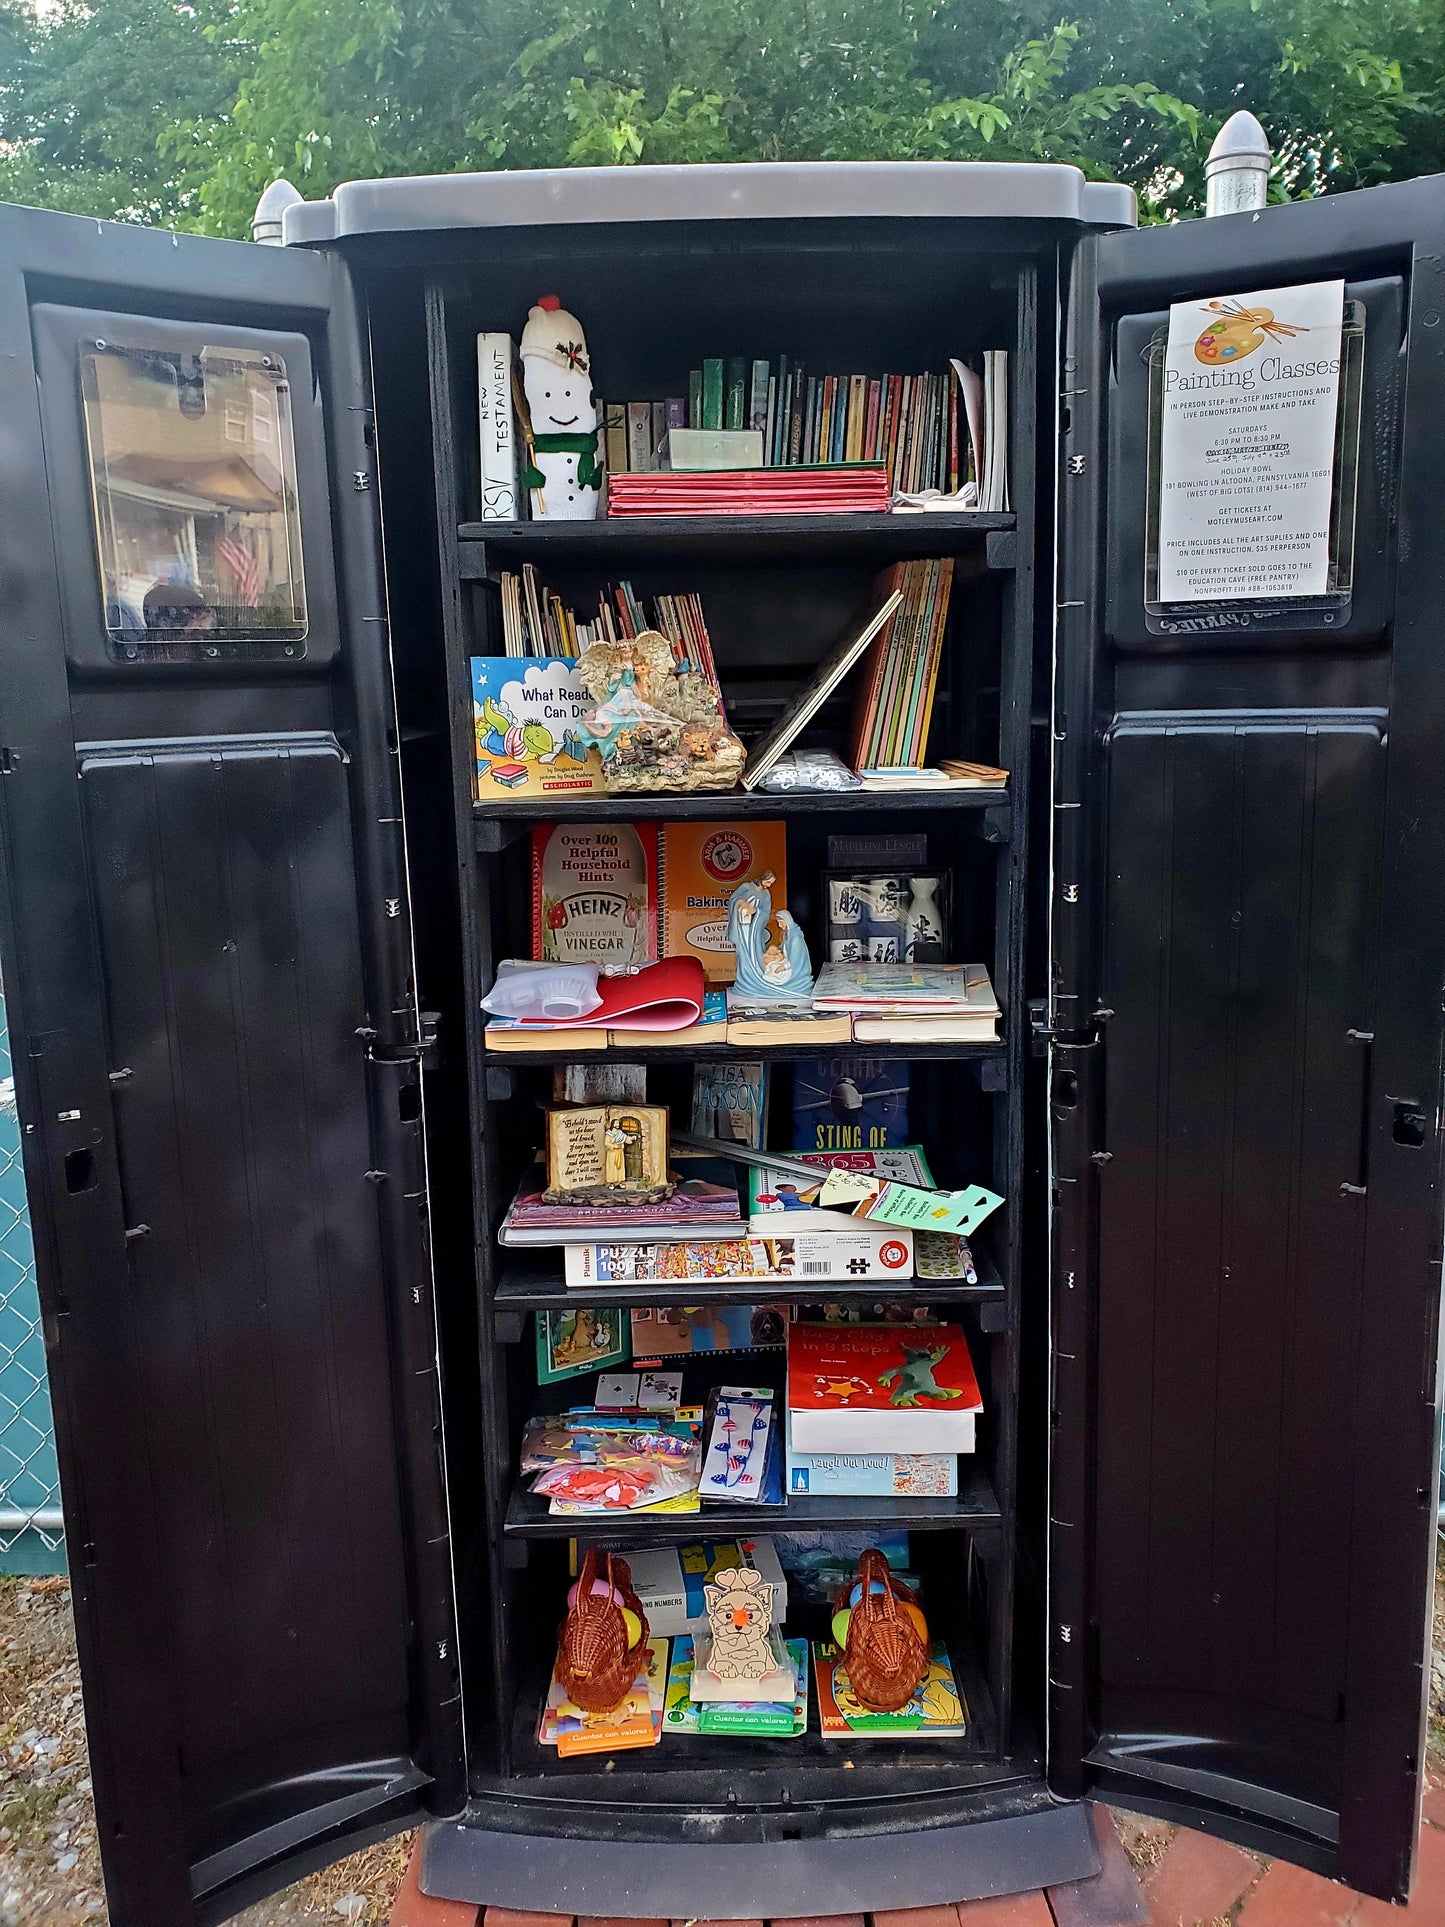 Everything in this toy box is free. All the items inside are education related with new items being added regularly. Take what you need, give what you can.